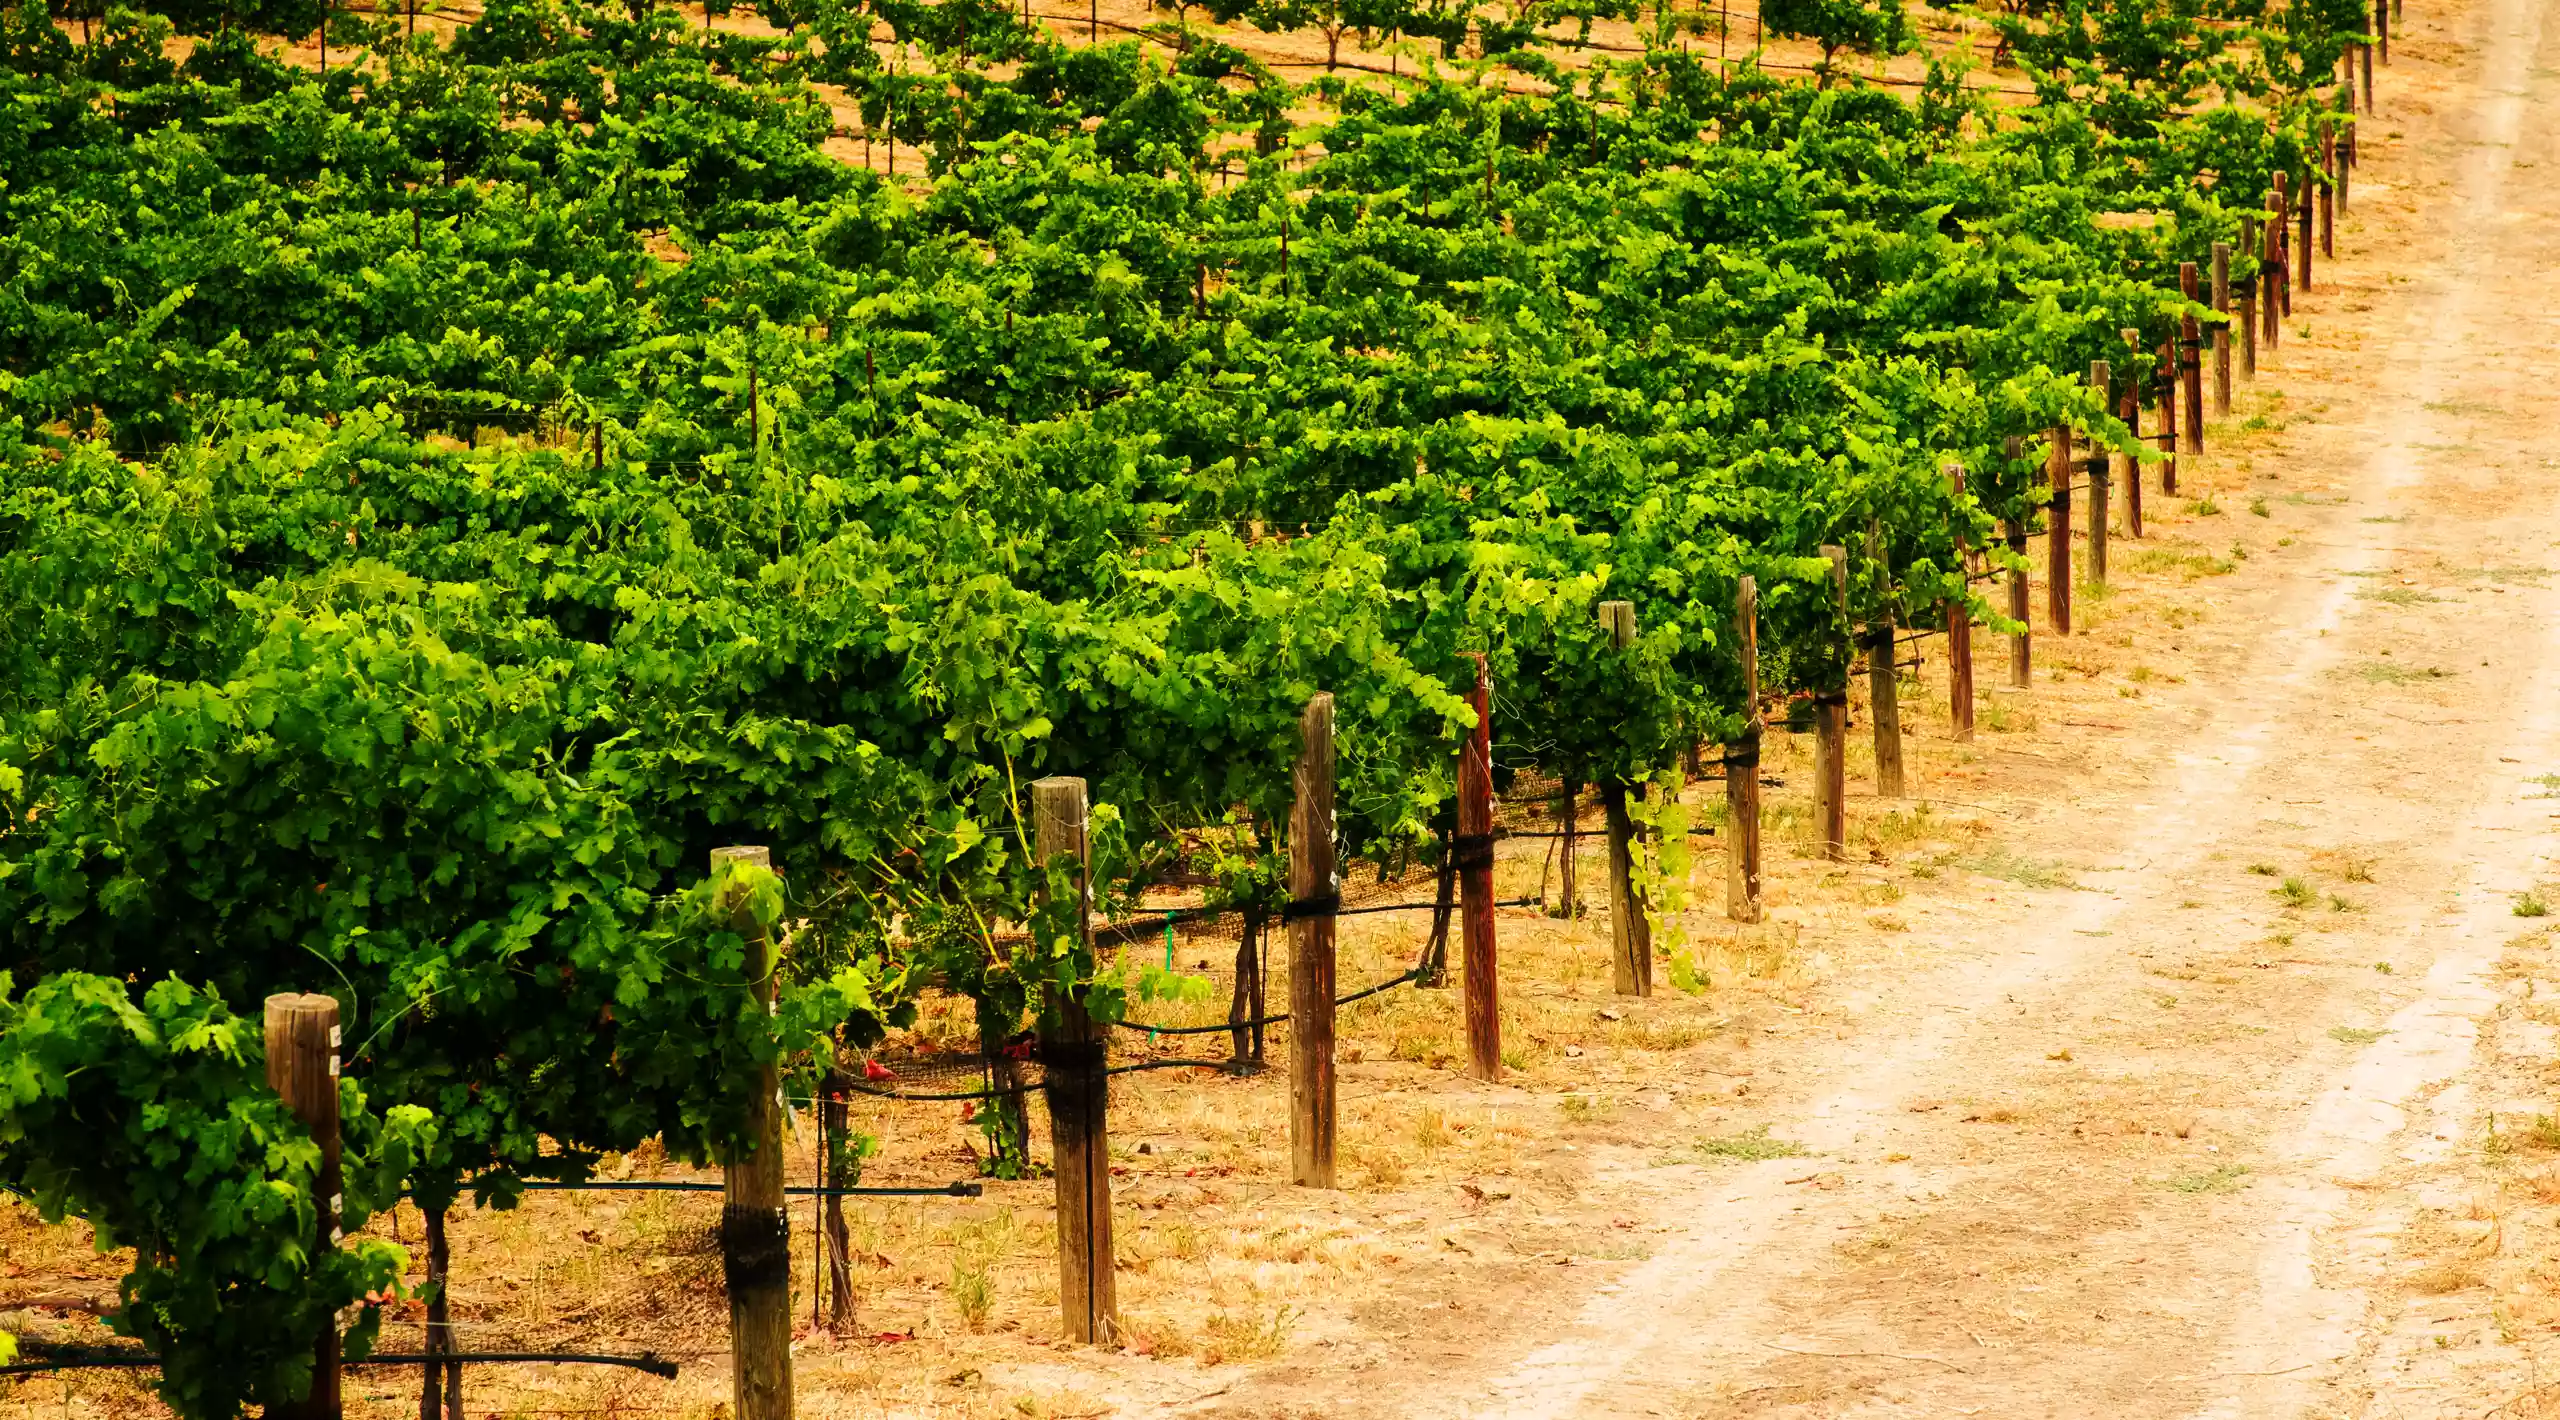 View of a few rows of grapevines in a vineyard